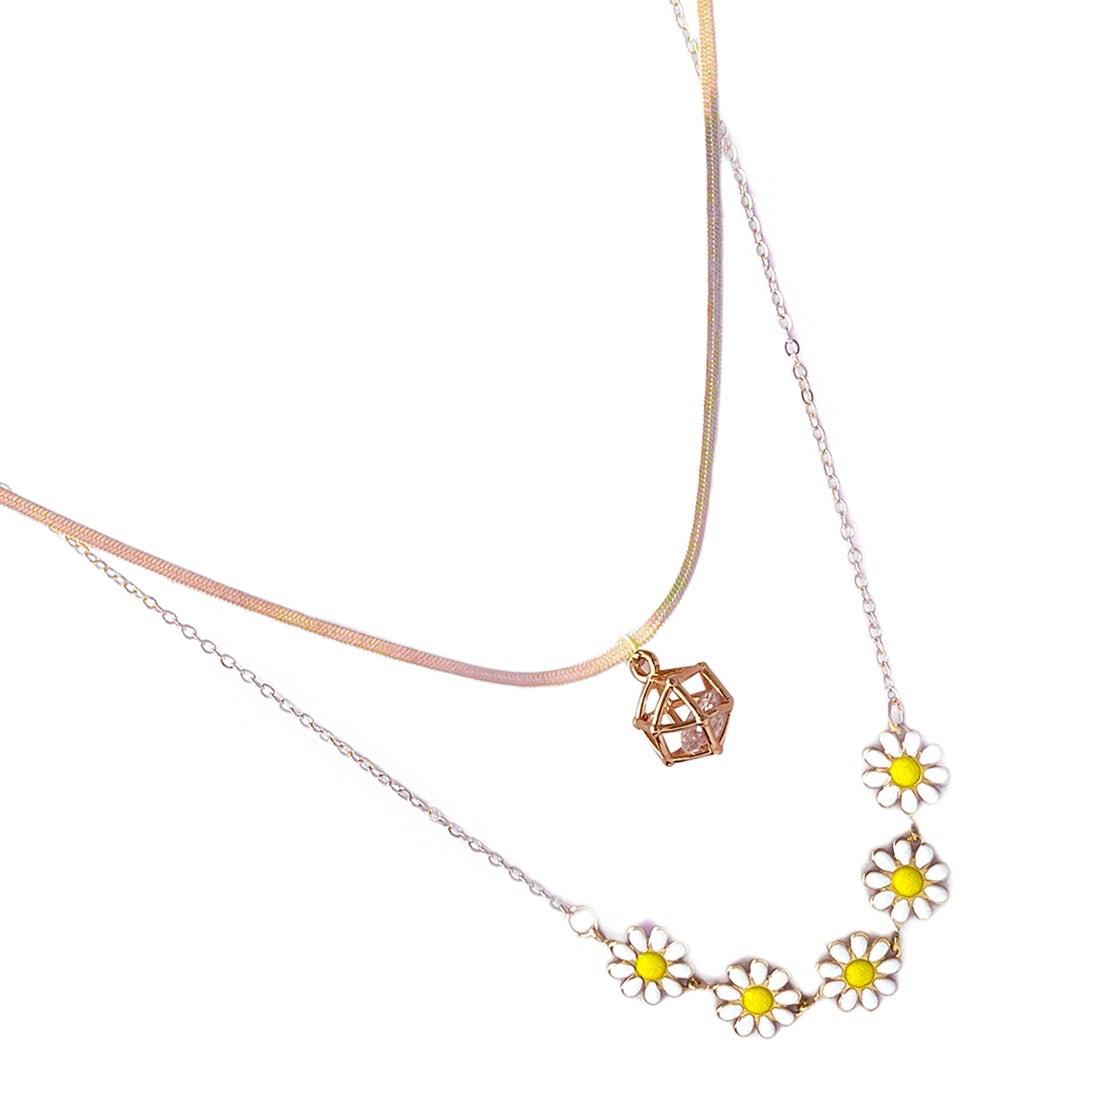 Enamel Flower Charm & Square Diamante Pendant Rose Gold-Toned Snake Chain Layered Necklace